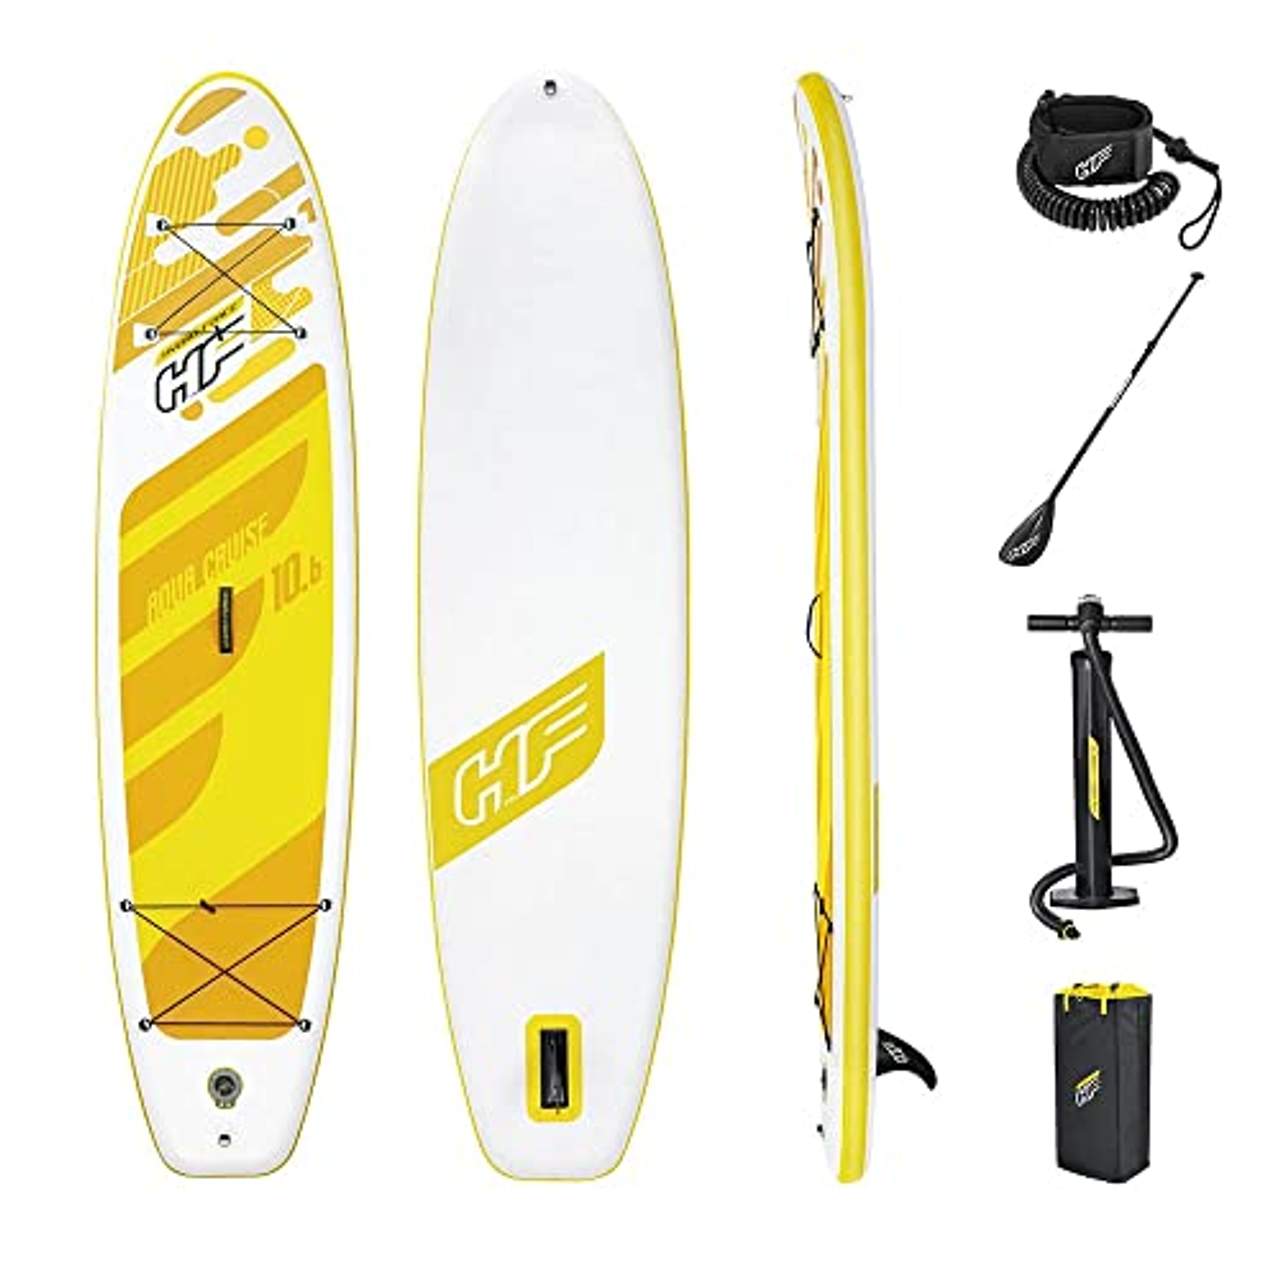 Bestway Hydro-Force SUP Touring Board-Set